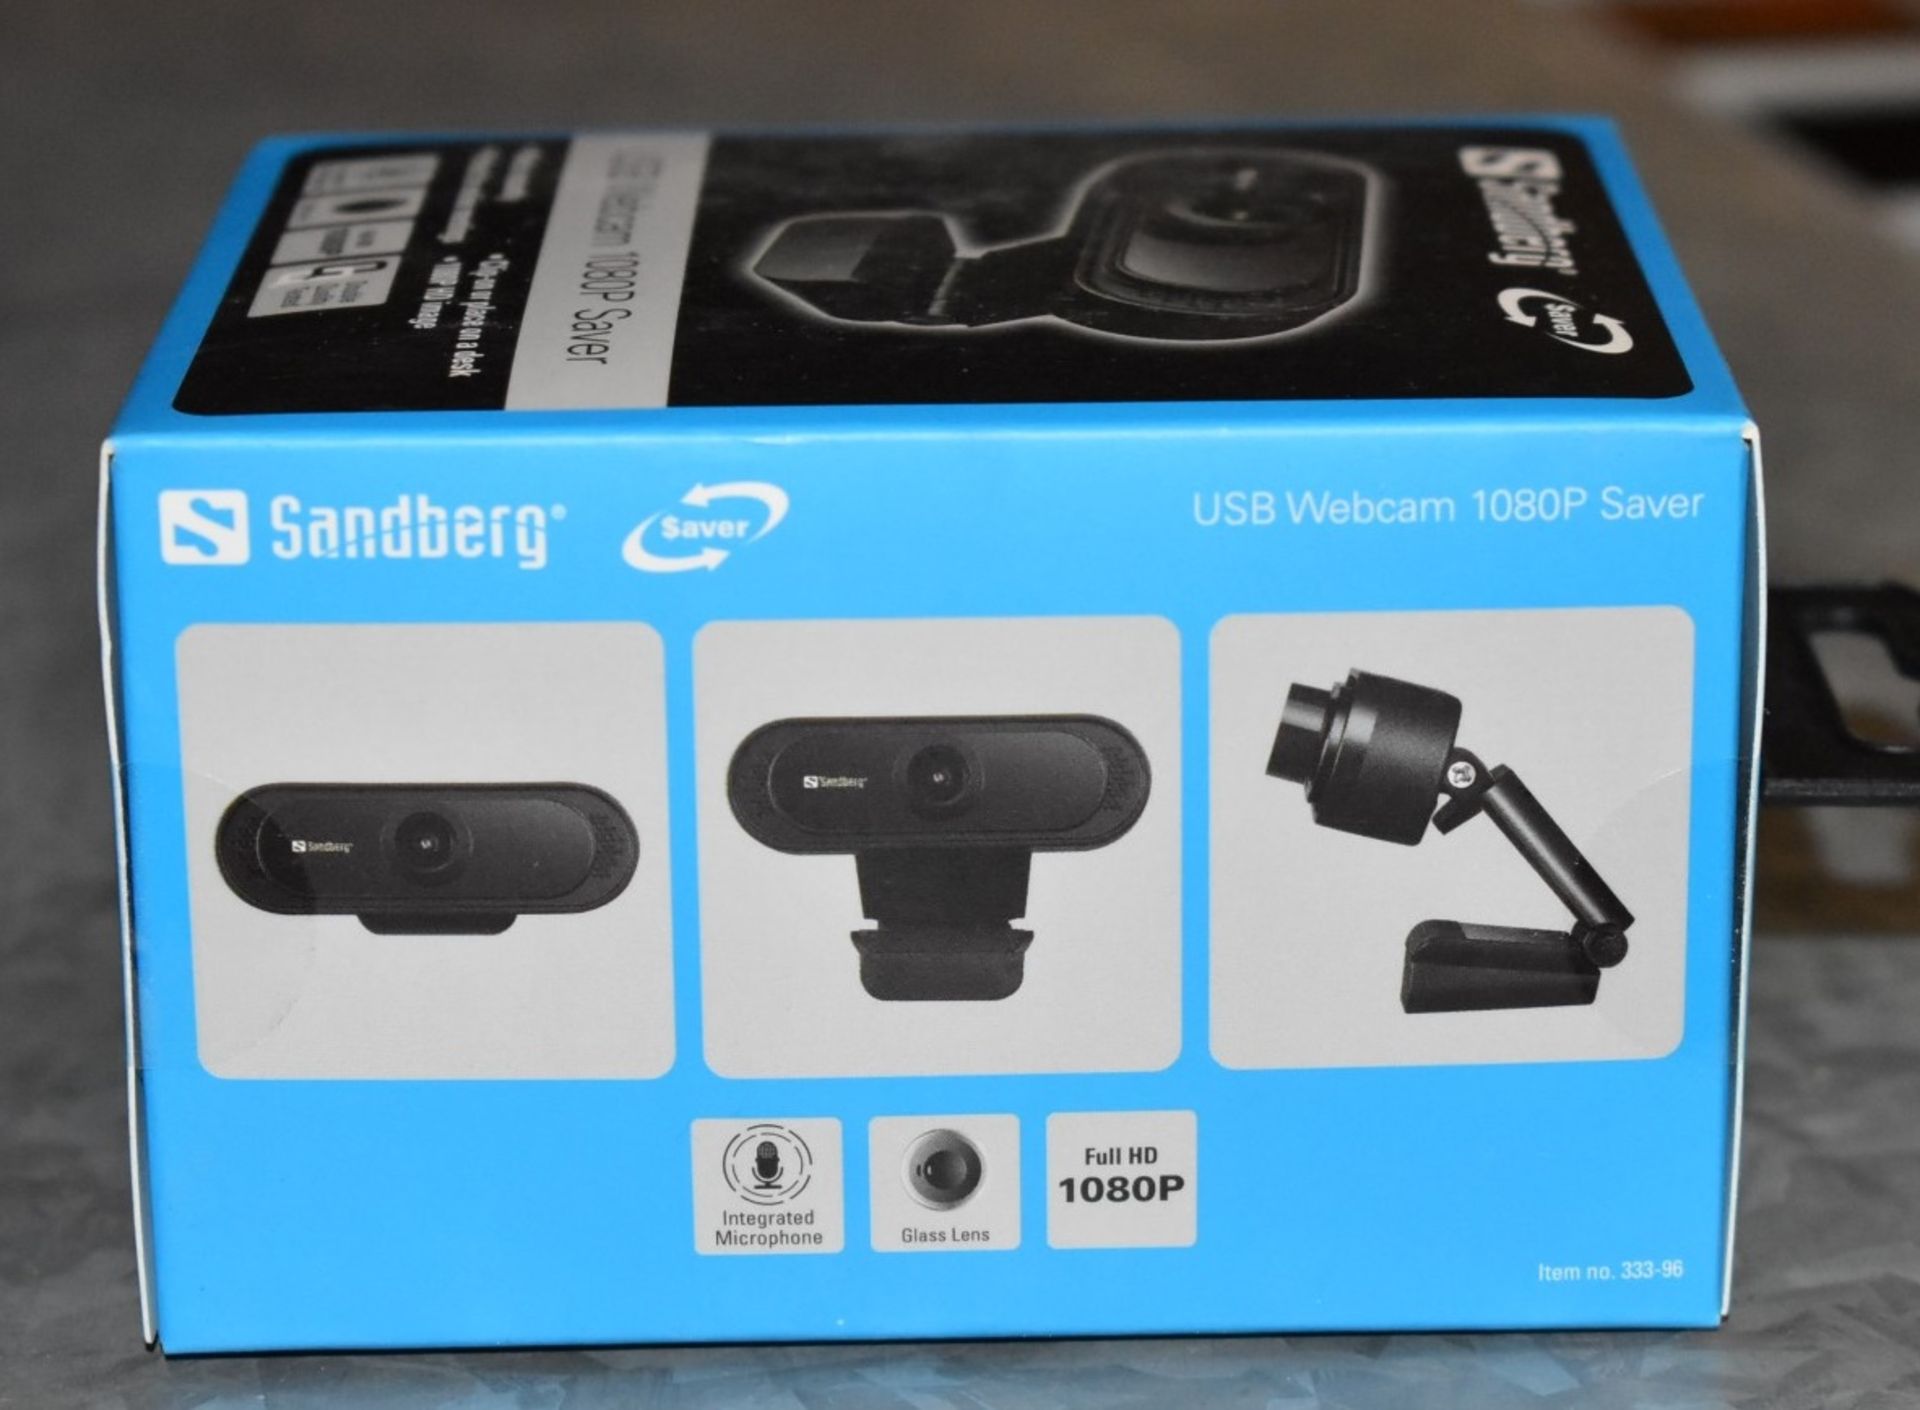 5 x Sandberg USB Full HD 1080p Webcams With Microphone - RRP £34.99 - New Boxed Stock - Ref: AC94 - Image 3 of 3